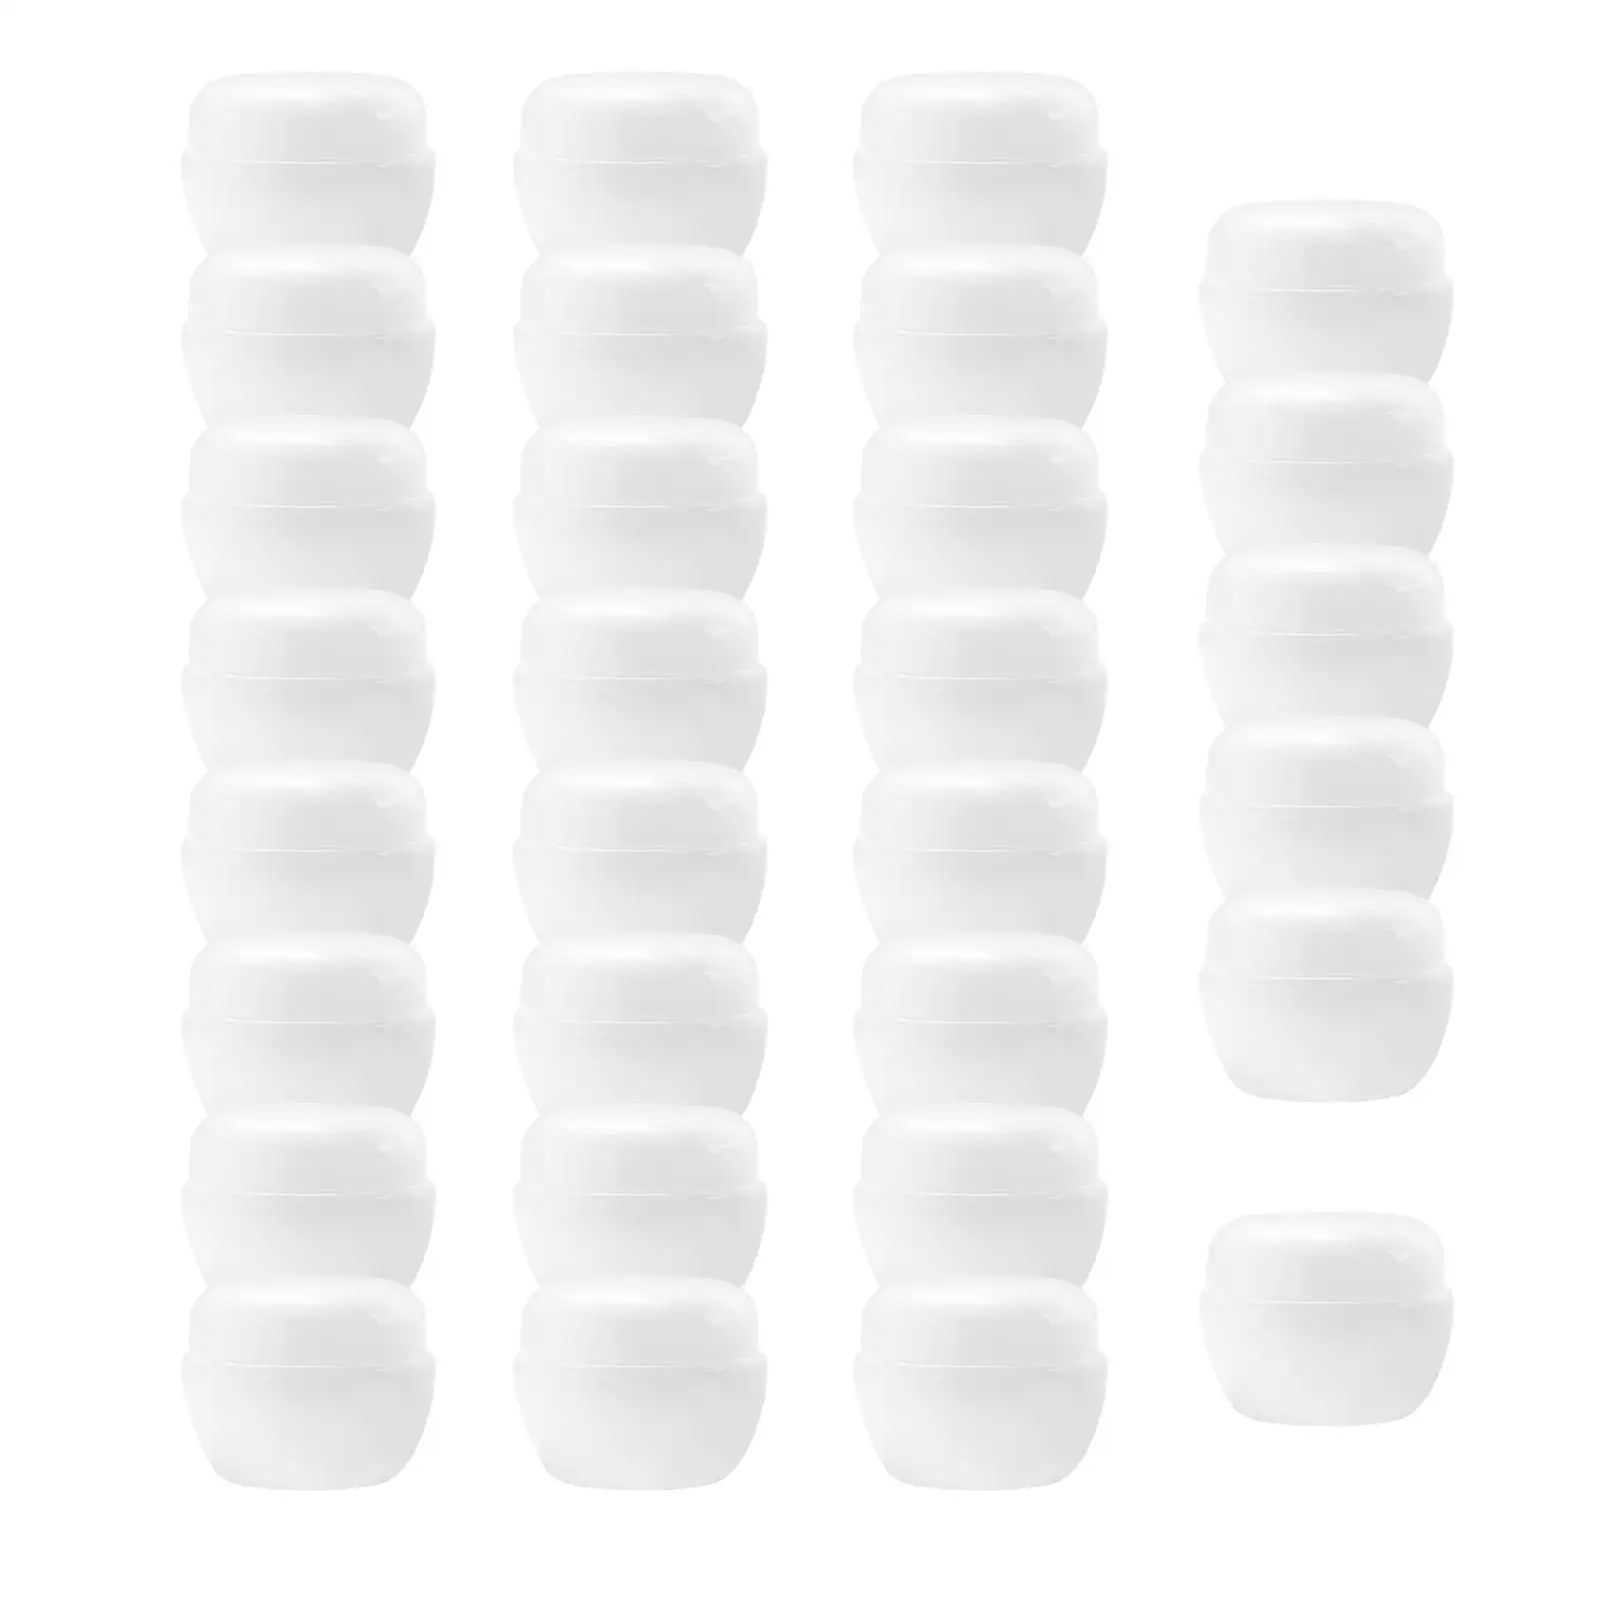 30 Pieces Cosmetic Jars Refillable 10G Empty Small for Balms Lotion Samples